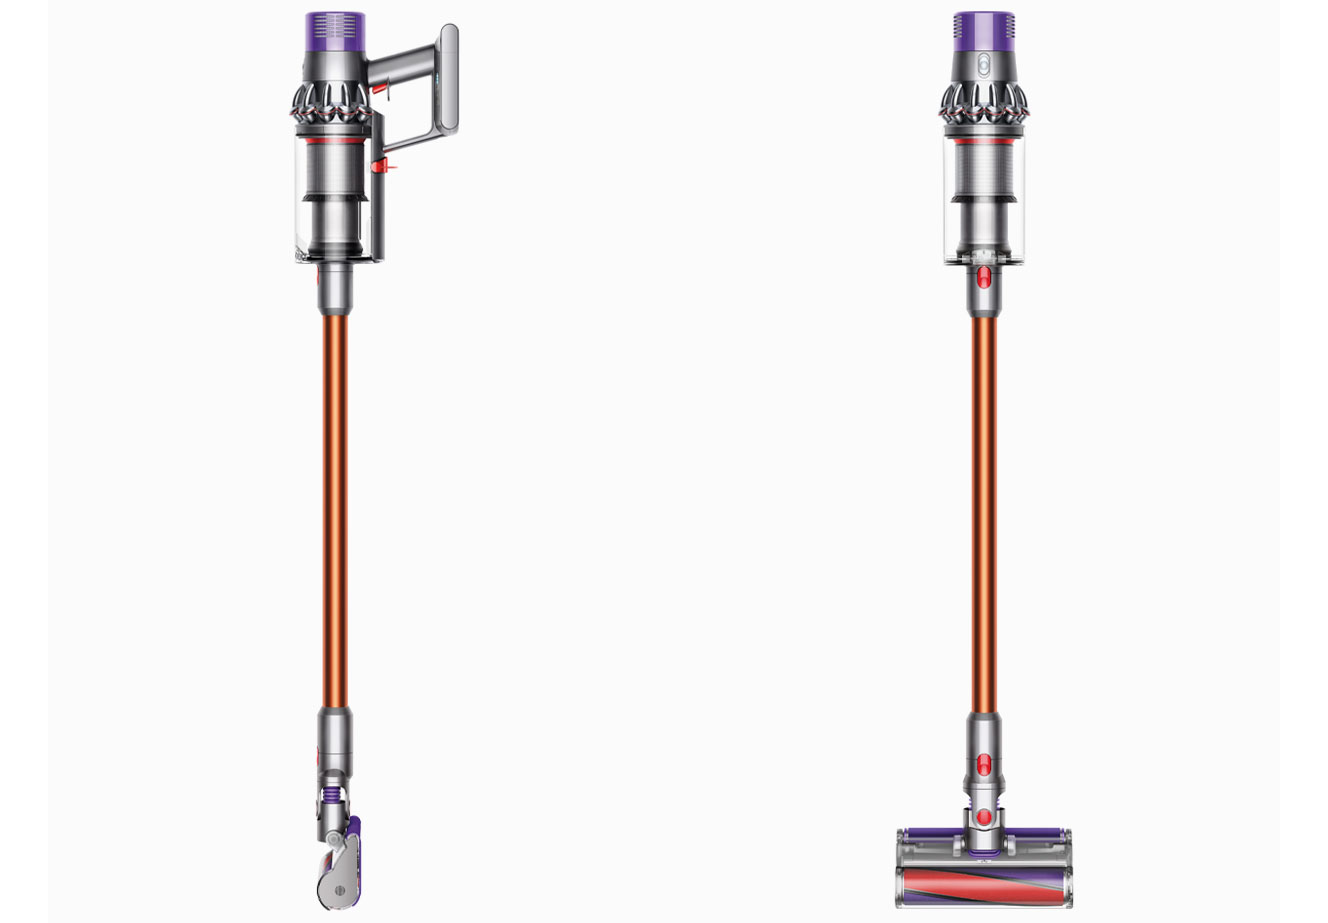 Dyson Cyclone V10™ Absolute